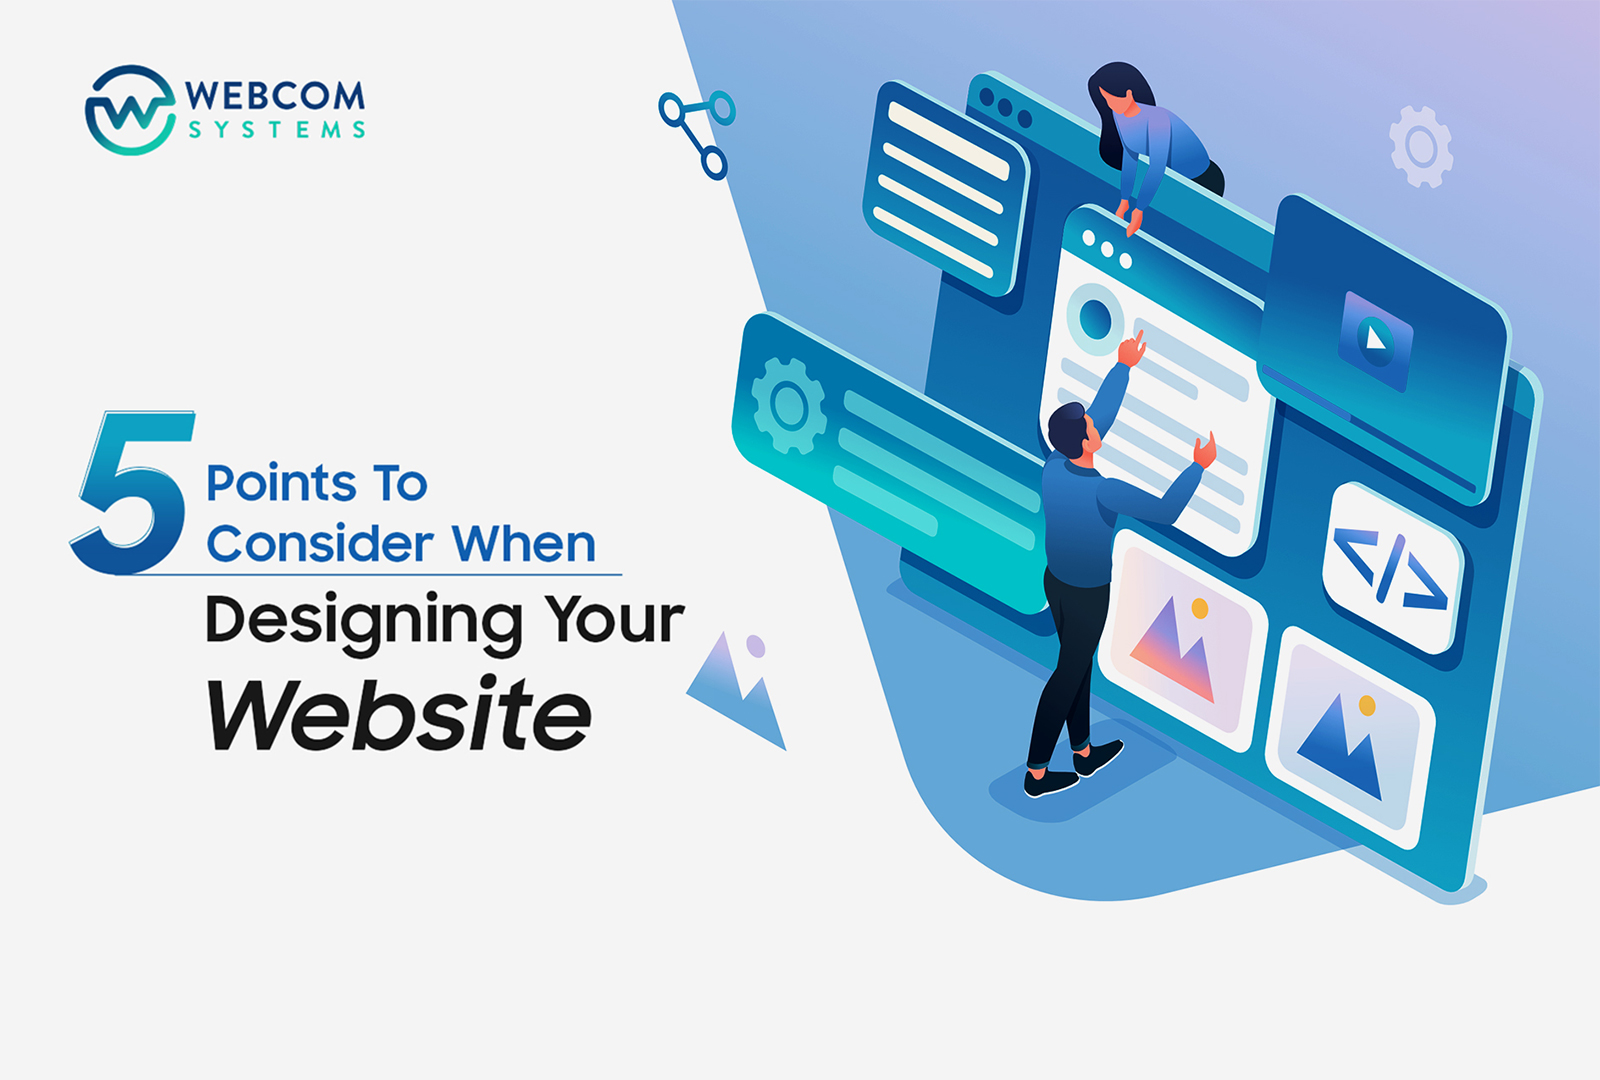 5 Points To Consider When Designing Your Website